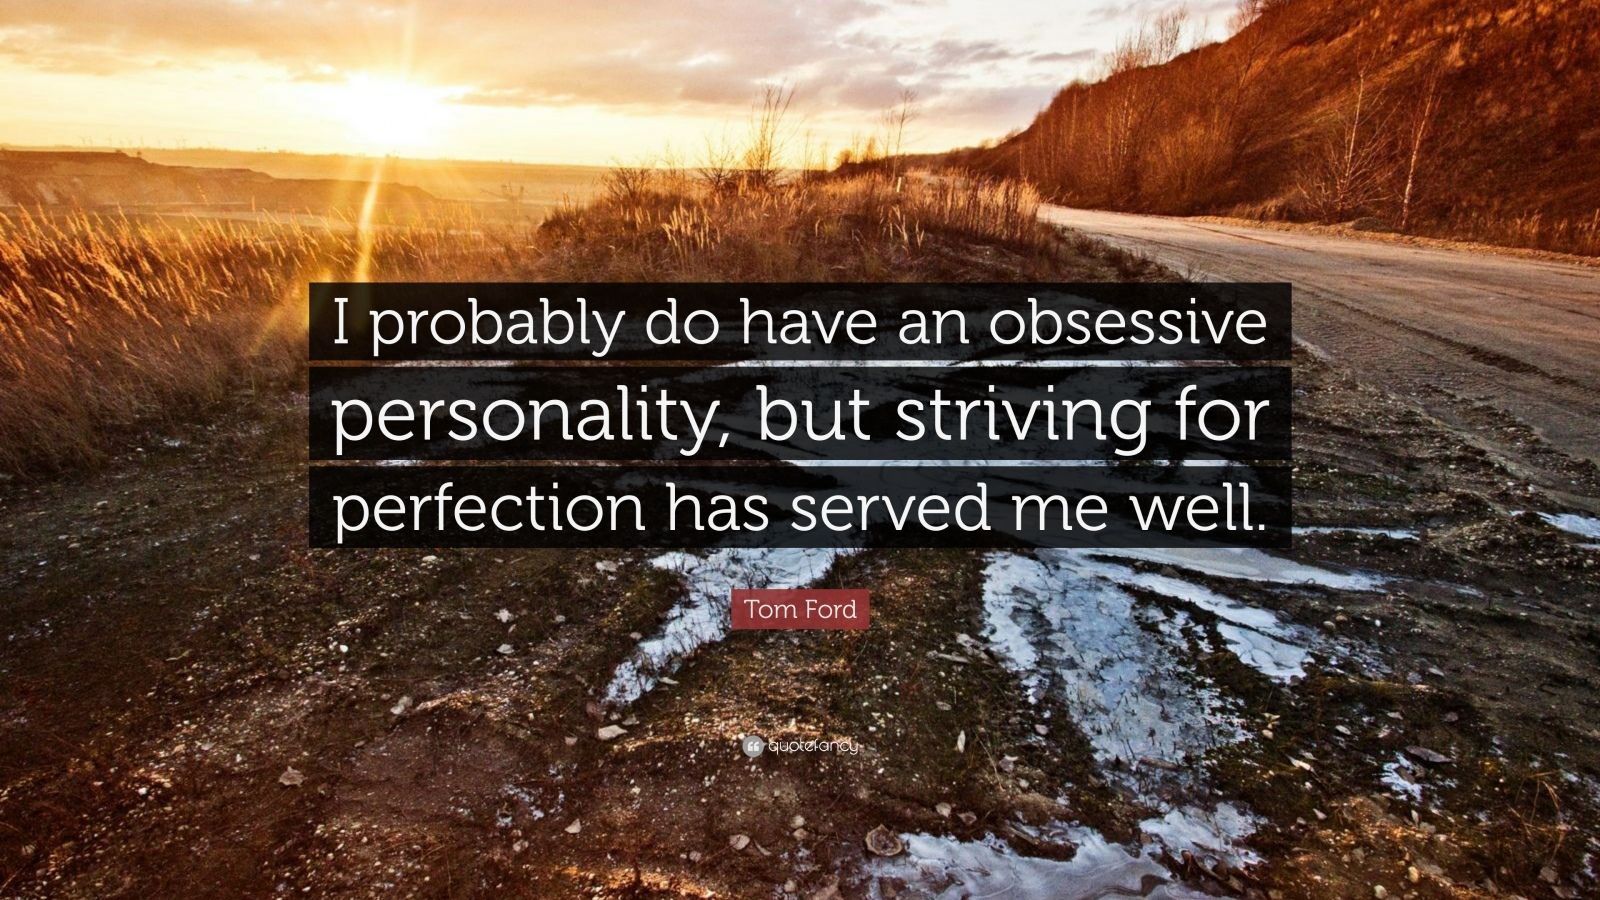 Tom Ford Quote: “I probably do have an obsessive personality, but striving  for perfection has served me well.”